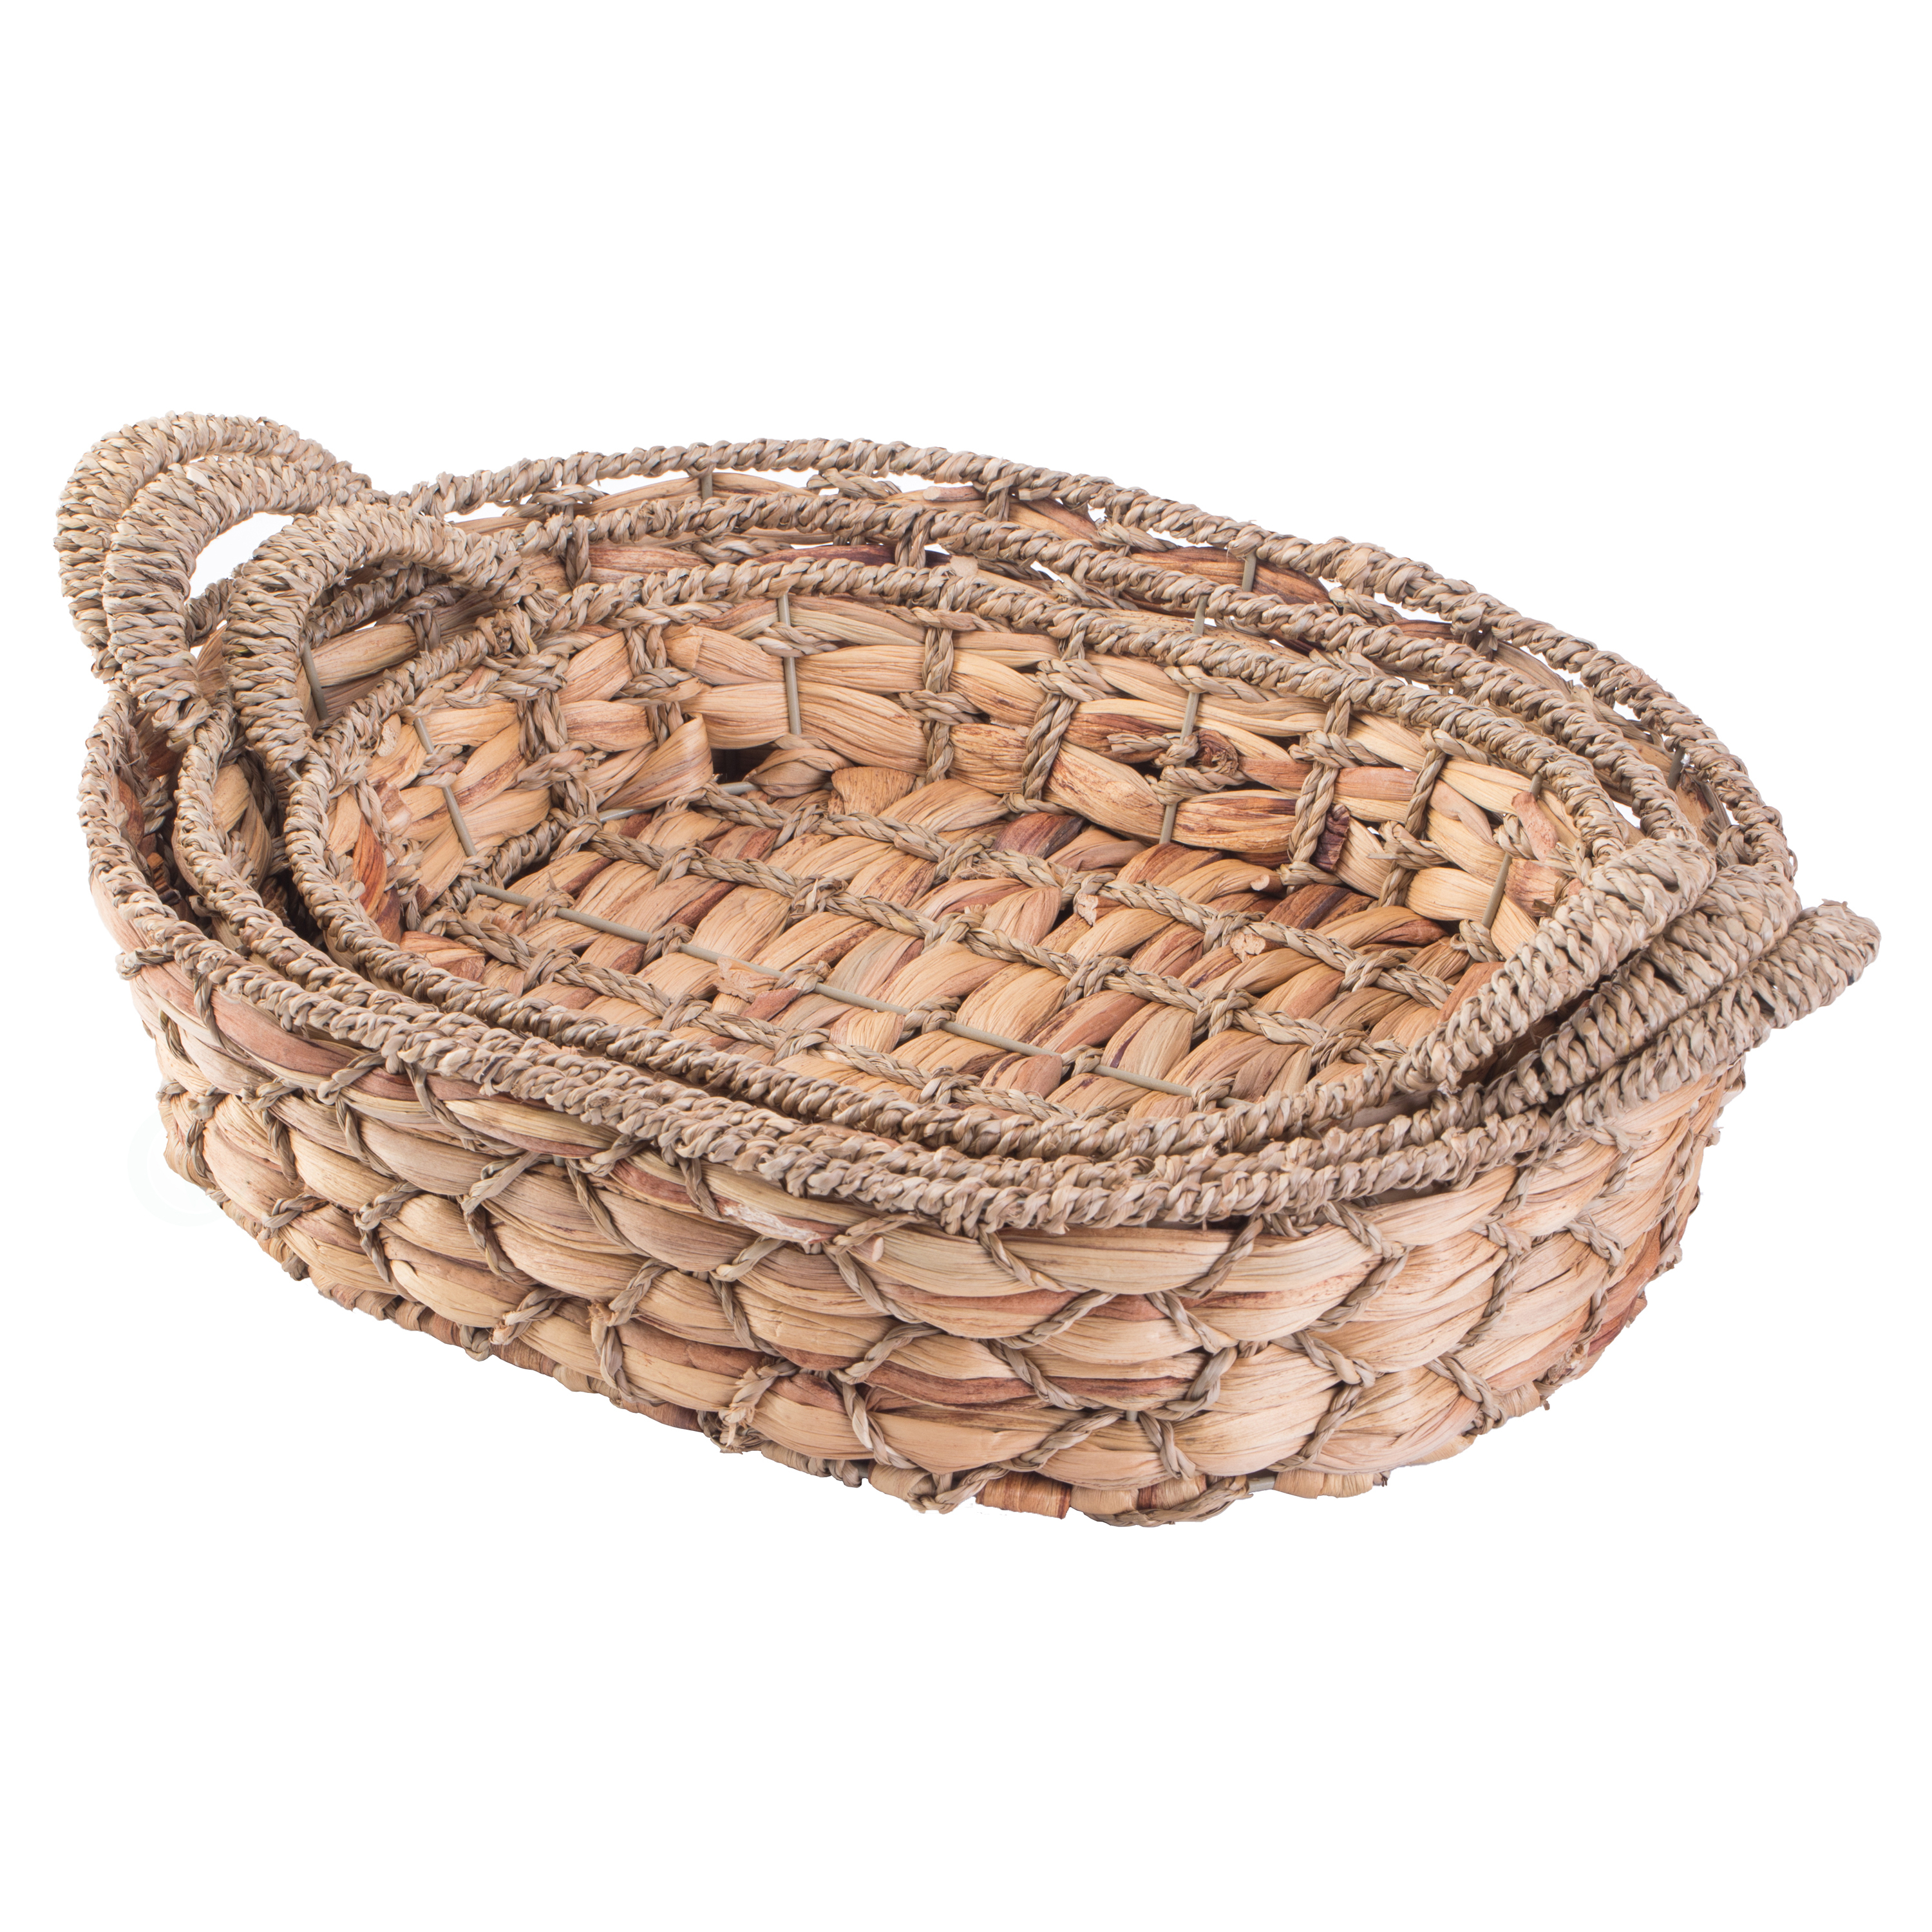 Seagrass Fruit Bread Basket Tray With Handles - Set Of 4 Small